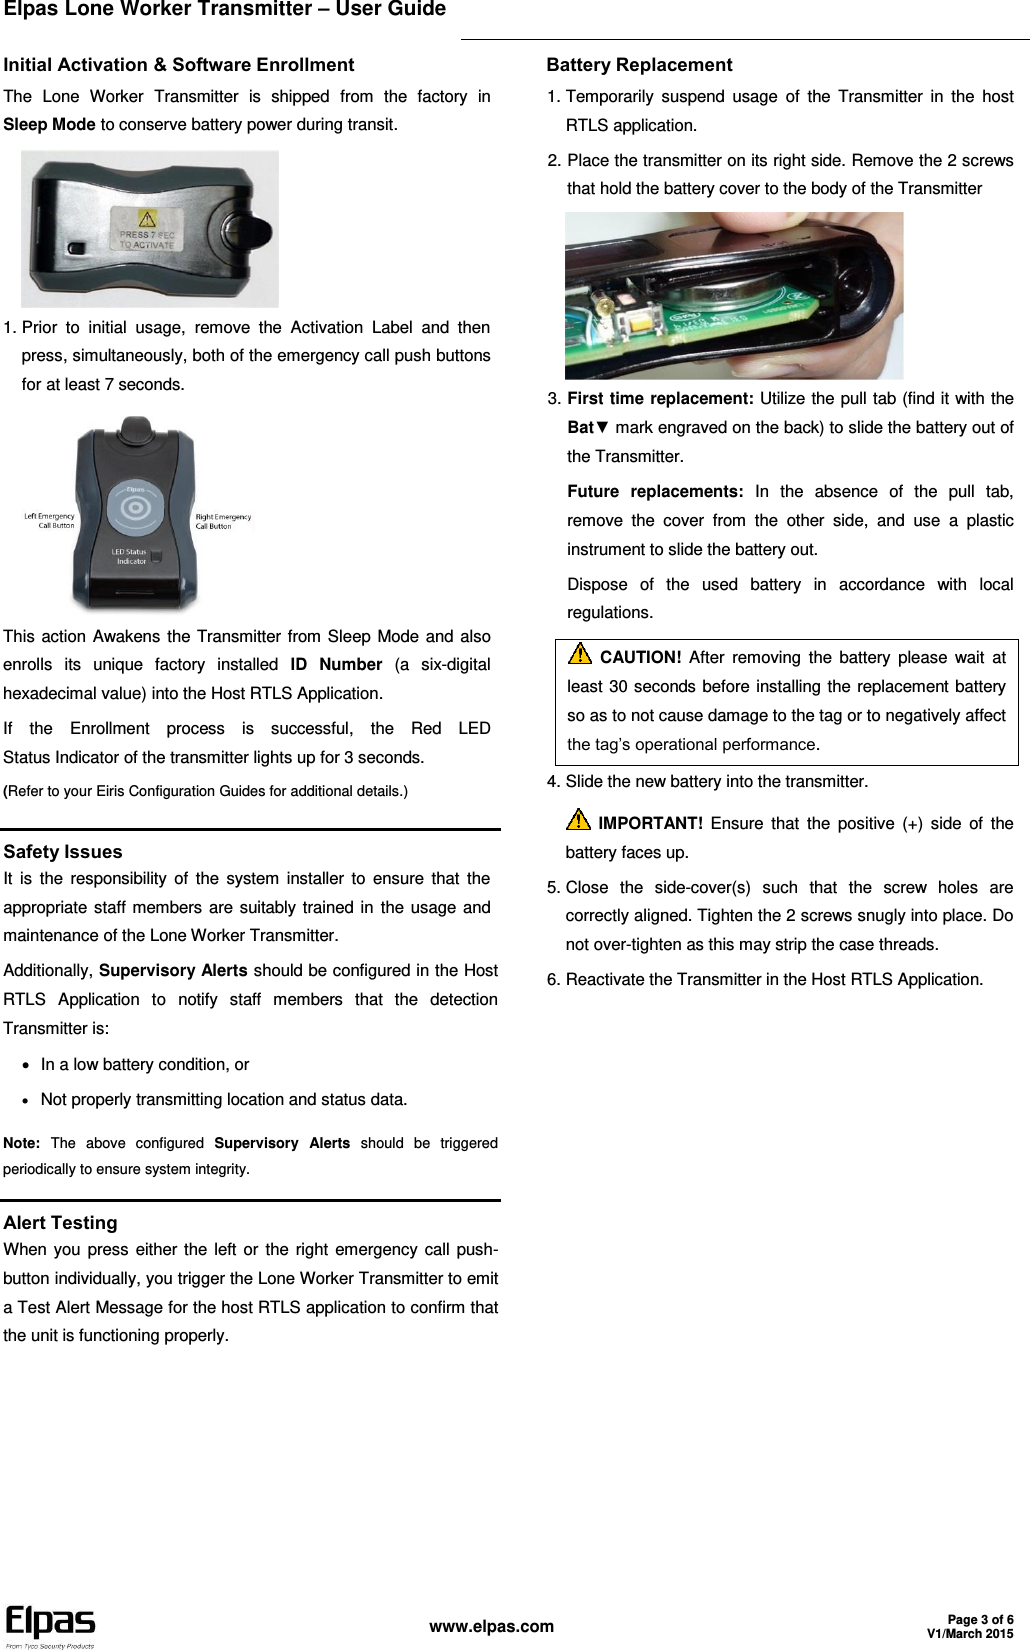 Elpas Lone Worker Transmitter – User Guide    www.elpas.com Page 3 of 6 V1/March 2015  Initial Activation &amp; Software Enrollment The  Lone  Worker  Transmitter  is  shipped  from  the  factory  in  Sleep Mode to conserve battery power during transit.  1. Prior  to  initial  usage,  remove  the  Activation  Label  and  then press, simultaneously, both of the emergency call push buttons for at least 7 seconds.  This action Awakens the Transmitter from Sleep Mode and also enrolls  its  unique  factory  installed  ID  Number  (a  six-digital hexadecimal value) into the Host RTLS Application. If  the  Enrollment  process  is  successful,  the  Red  LED Status Indicator of the transmitter lights up for 3 seconds. (Refer to your Eiris Configuration Guides for additional details.) Battery Replacement 1. Temporarily  suspend  usage  of  the  Transmitter  in  the  host RTLS application. 2. Place the transmitter on its right side. Remove the 2 screws that hold the battery cover to the body of the Transmitter  3. First time replacement: Utilize the pull tab (find it with the Bat▼ mark engraved on the back) to slide the battery out of the Transmitter. Future  replacements:  In  the  absence  of  the  pull  tab, remove  the  cover  from  the  other  side,  and  use  a  plastic instrument to slide the battery out. Dispose  of  the  used  battery  in  accordance  with  local regulations.  CAUTION!  After  removing  the  battery  please  wait  at least 30 seconds before installing the replacement battery so as to not cause damage to the tag or to negatively affect the tag’s operational performance. 4. Slide the new battery into the transmitter.  IMPORTANT!  Ensure  that  the  positive  (+)  side  of  the battery faces up. 5. Close  the  side-cover(s)  such  that  the  screw  holes  are correctly aligned. Tighten the 2 screws snugly into place. Do not over-tighten as this may strip the case threads. 6. Reactivate the Transmitter in the Host RTLS Application.   Safety Issues It  is  the  responsibility  of  the  system  installer  to ensure  that the appropriate staff members are suitably trained in the usage and maintenance of the Lone Worker Transmitter. Additionally, Supervisory Alerts should be configured in the Host RTLS  Application  to  notify  staff  members  that  the  detection Transmitter is:   In a low battery condition, or  Not properly transmitting location and status data. Note:  The  above  configured  Supervisory  Alerts  should  be  triggered periodically to ensure system integrity.  Alert Testing When you press  either the left or  the right emergency call push-button individually, you trigger the Lone Worker Transmitter to emit a Test Alert Message for the host RTLS application to confirm that the unit is functioning properly. 